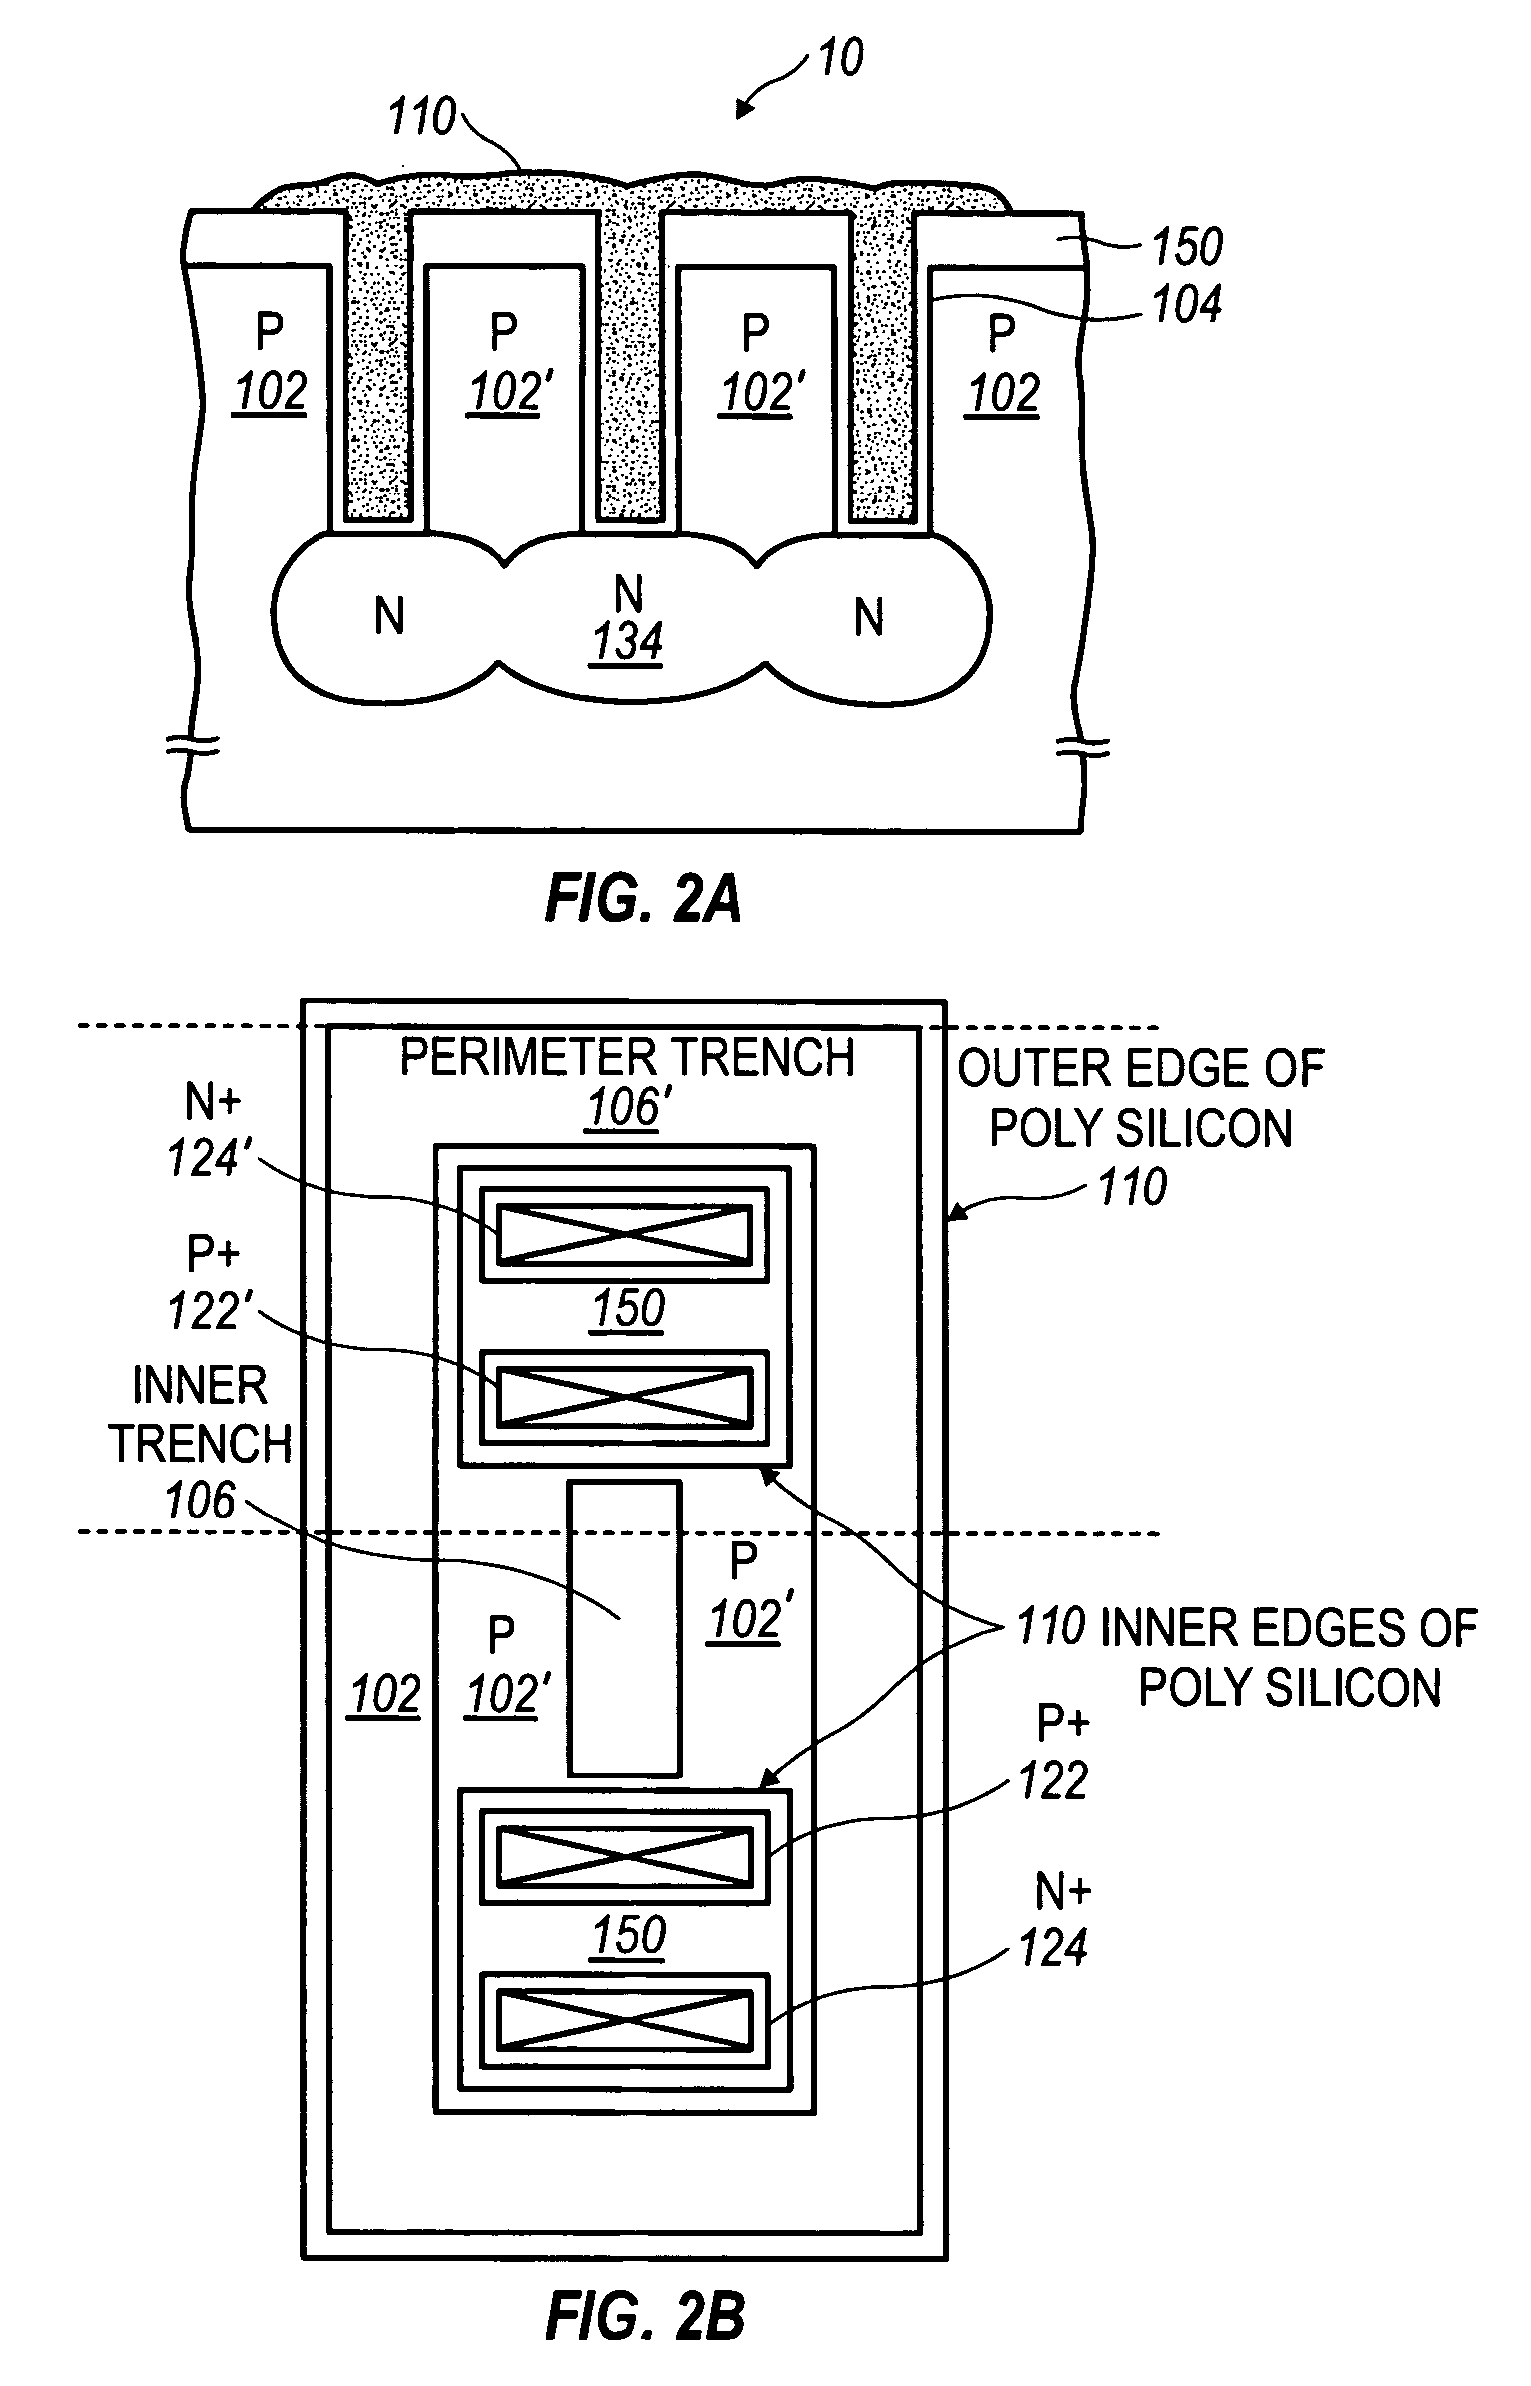 High-voltage transistor fabrication with trench etching technique